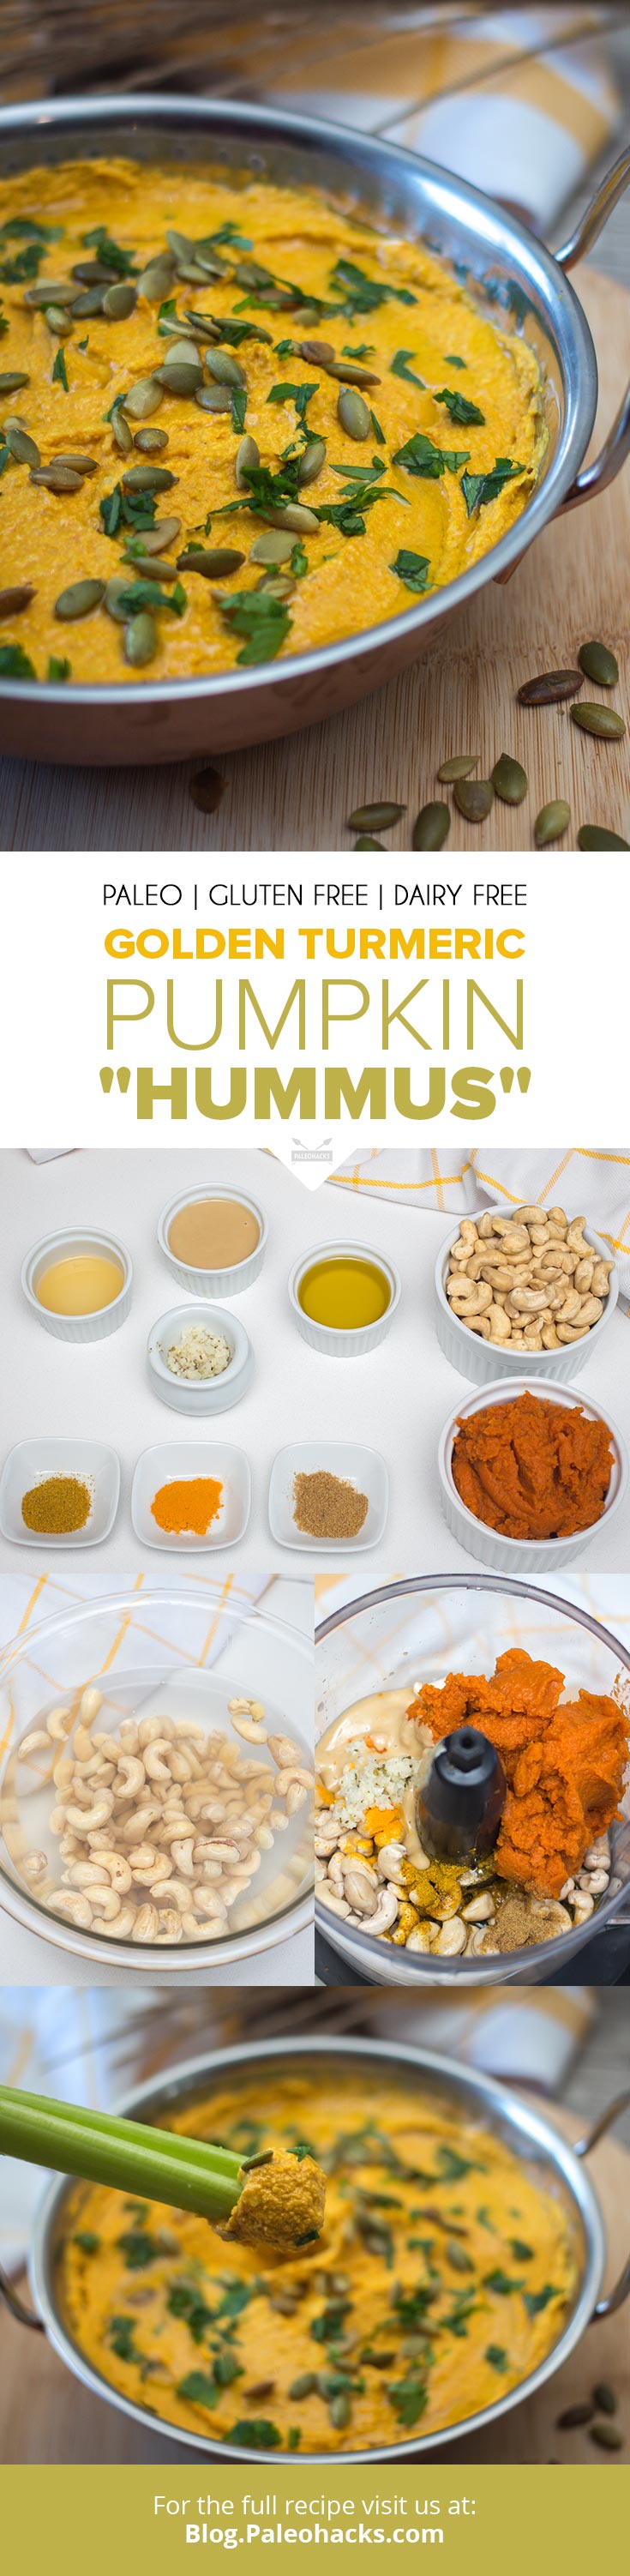 Seasoned with zesty spices, this pumpkin-packed hummus creates a healthy dip you can pair with fresh veggies or Paleo crackers. It's chef's kiss delicious!